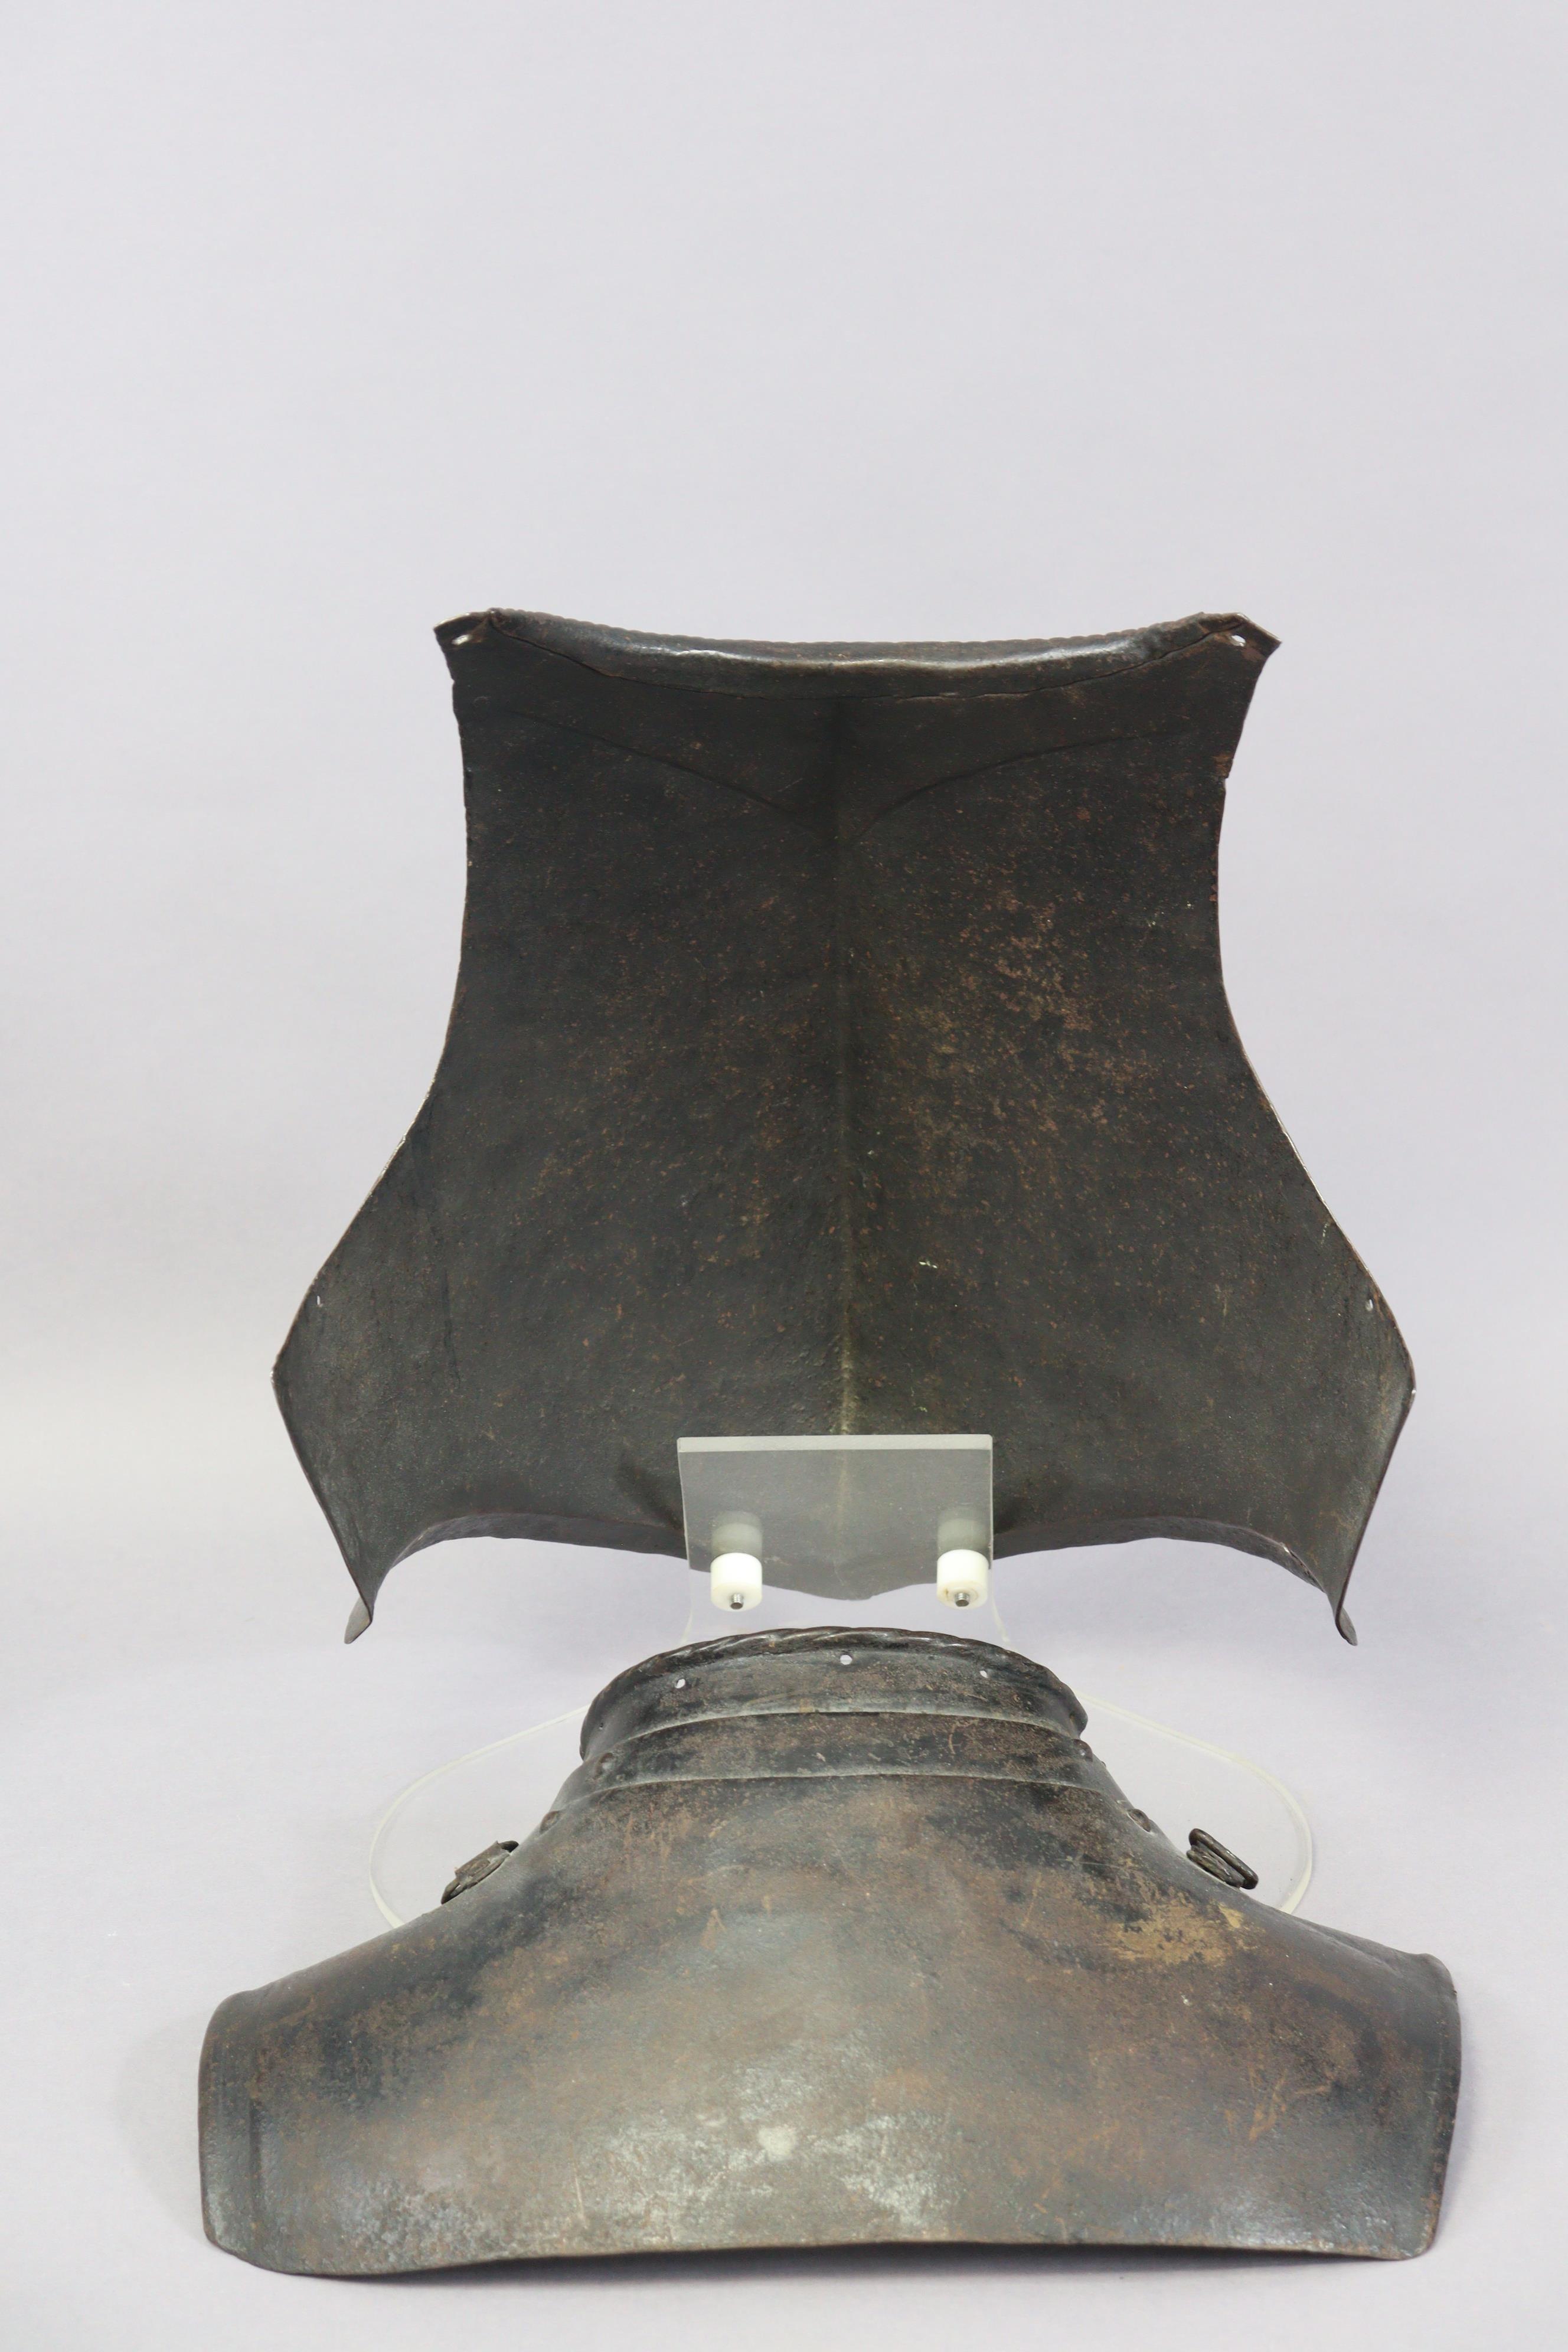 An English Civil War period lobster-tail steel helmet & breastplate, the pot helmet of typical form, - Image 8 of 11